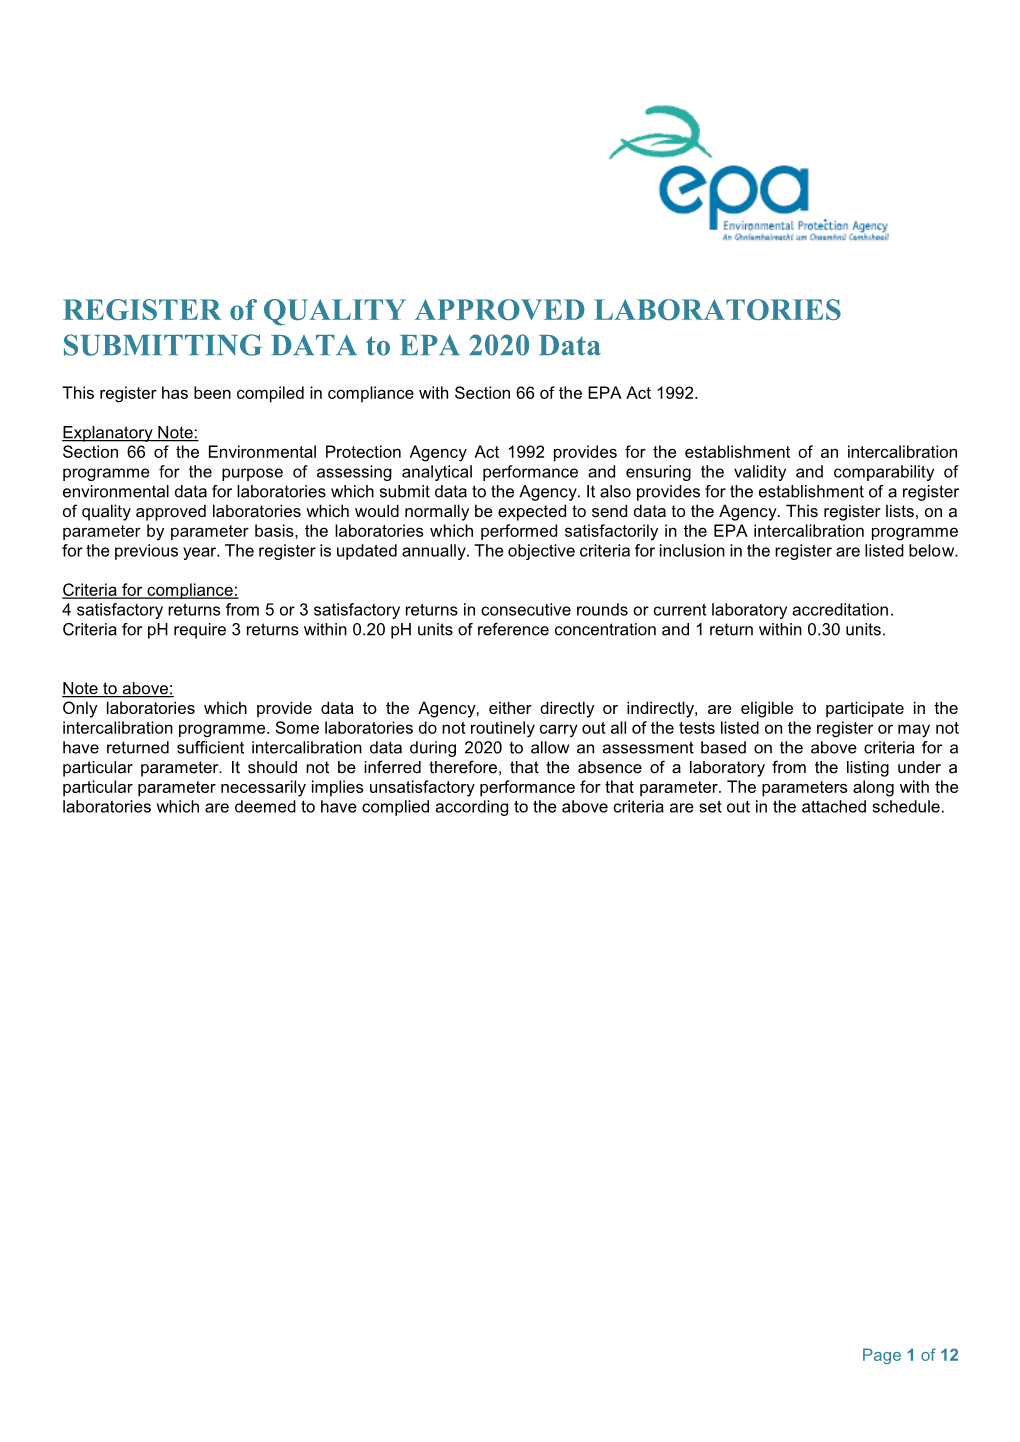 REGISTER of QUALITY APPROVED LABORATORIES SUBMITTING DATA to EPA 2020 Data